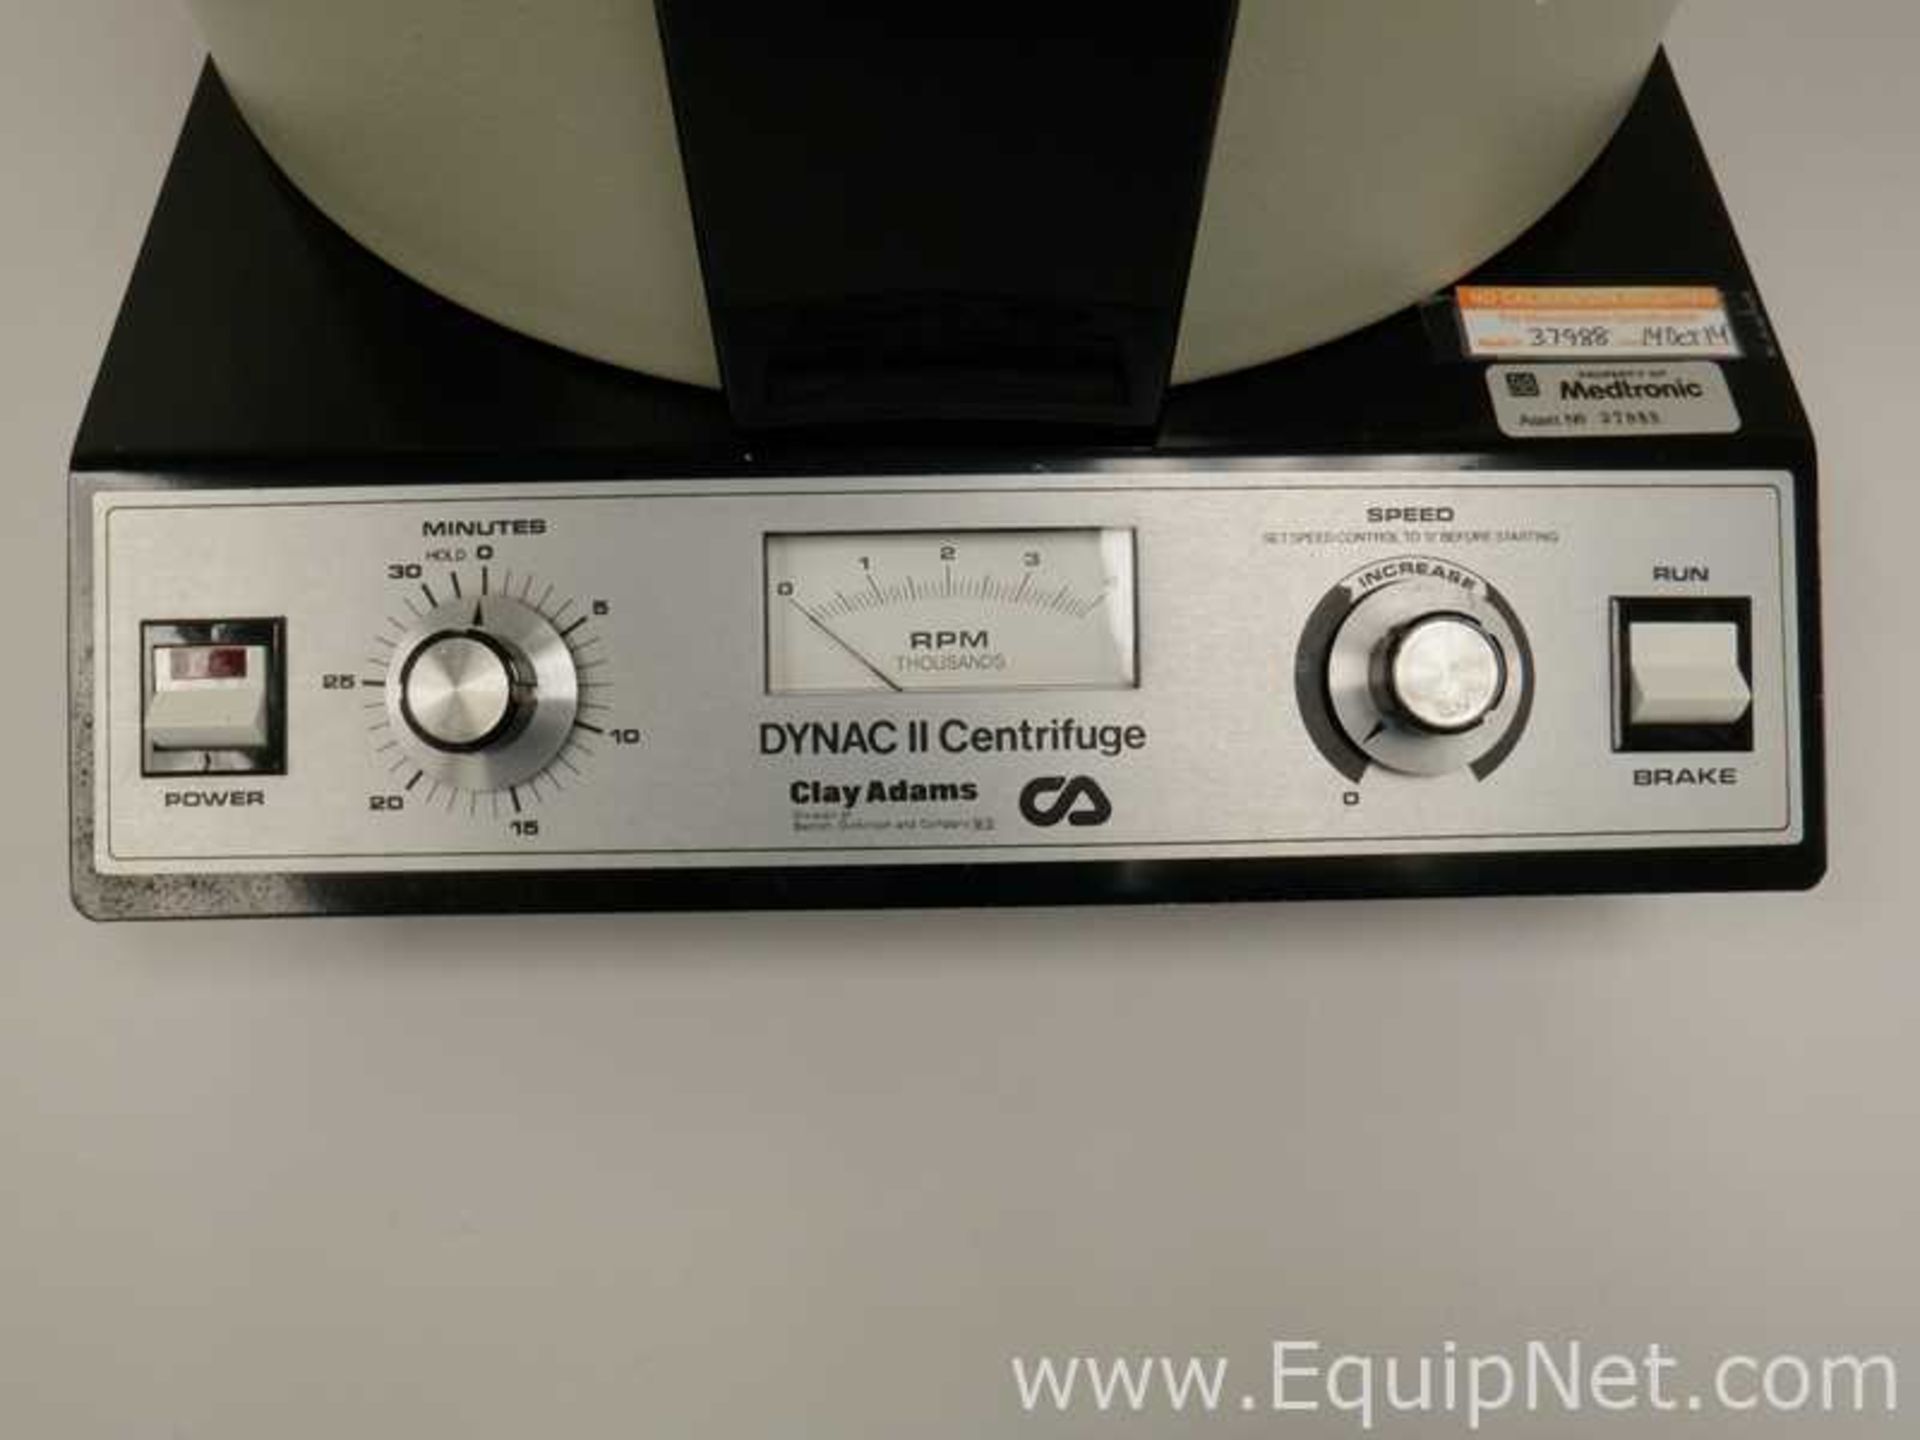 Clay Adams Dynac II Benchtop Centrifuge - Image 2 of 4